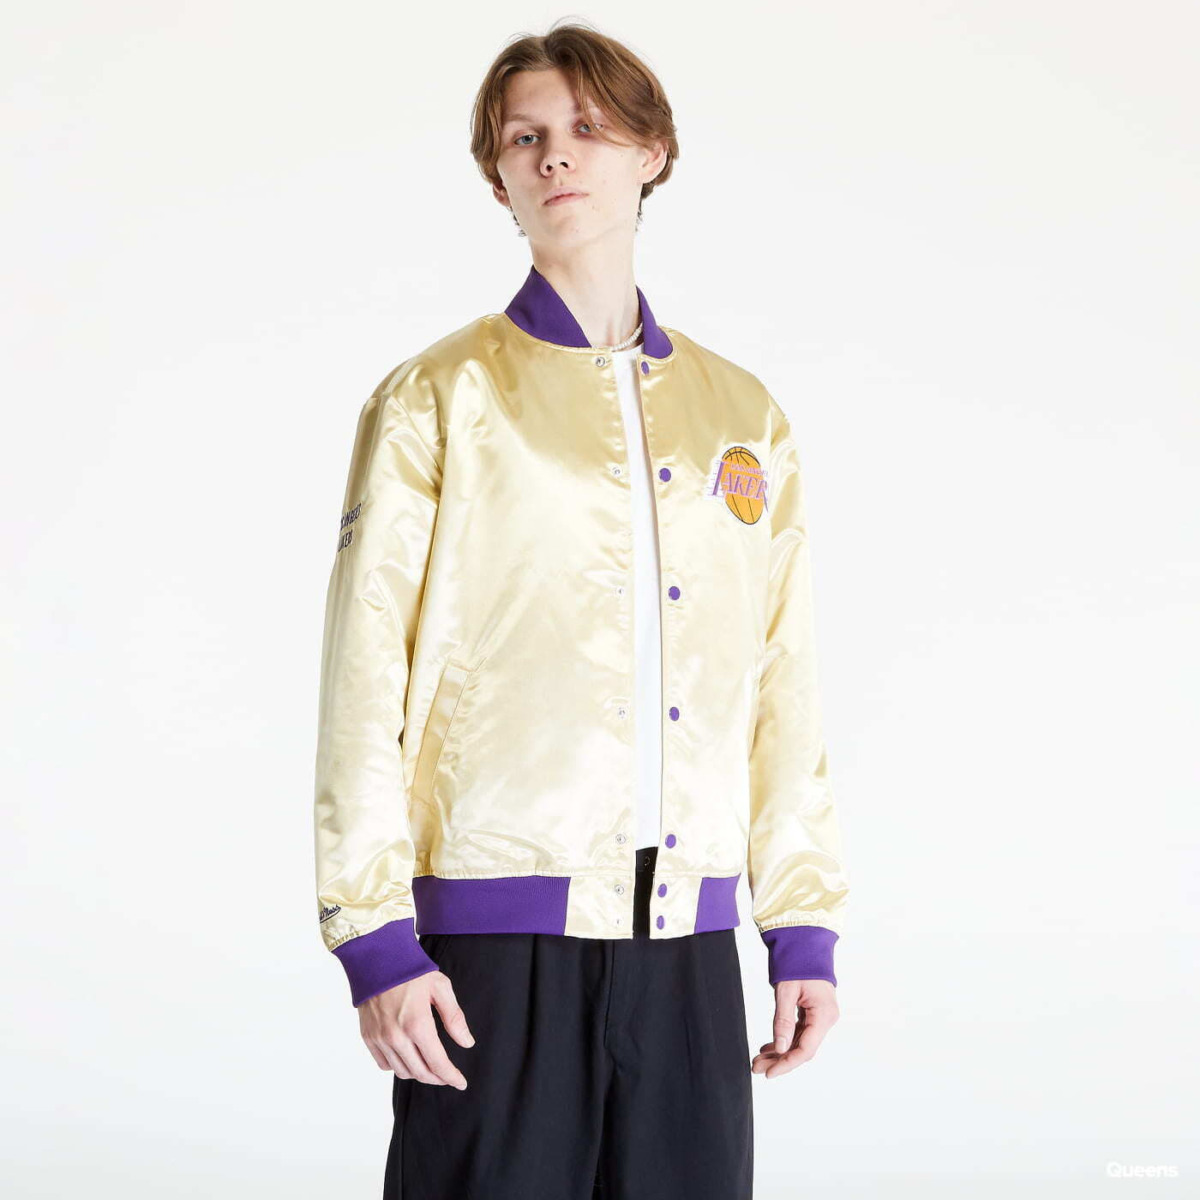 Footshop Gold Jacket for Men from Mitchell & Ness GOOFASH